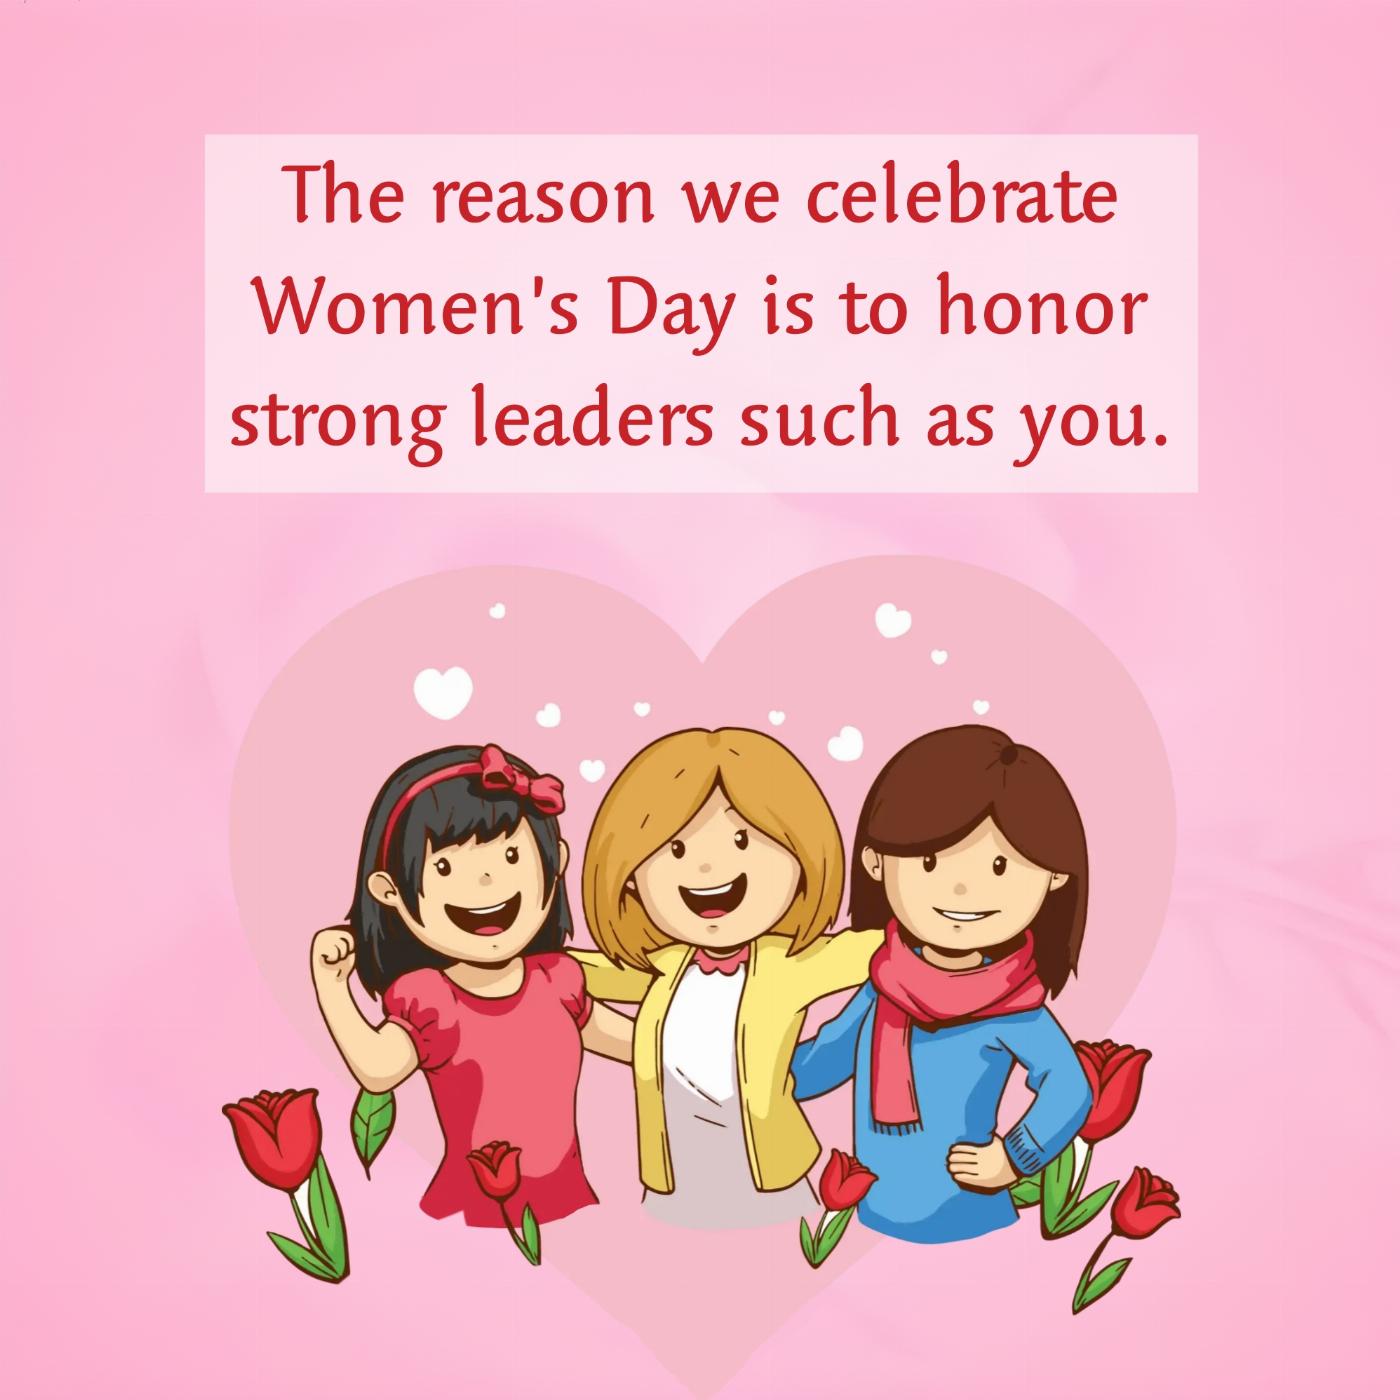 The reason we celebrate Womens Day is to honor